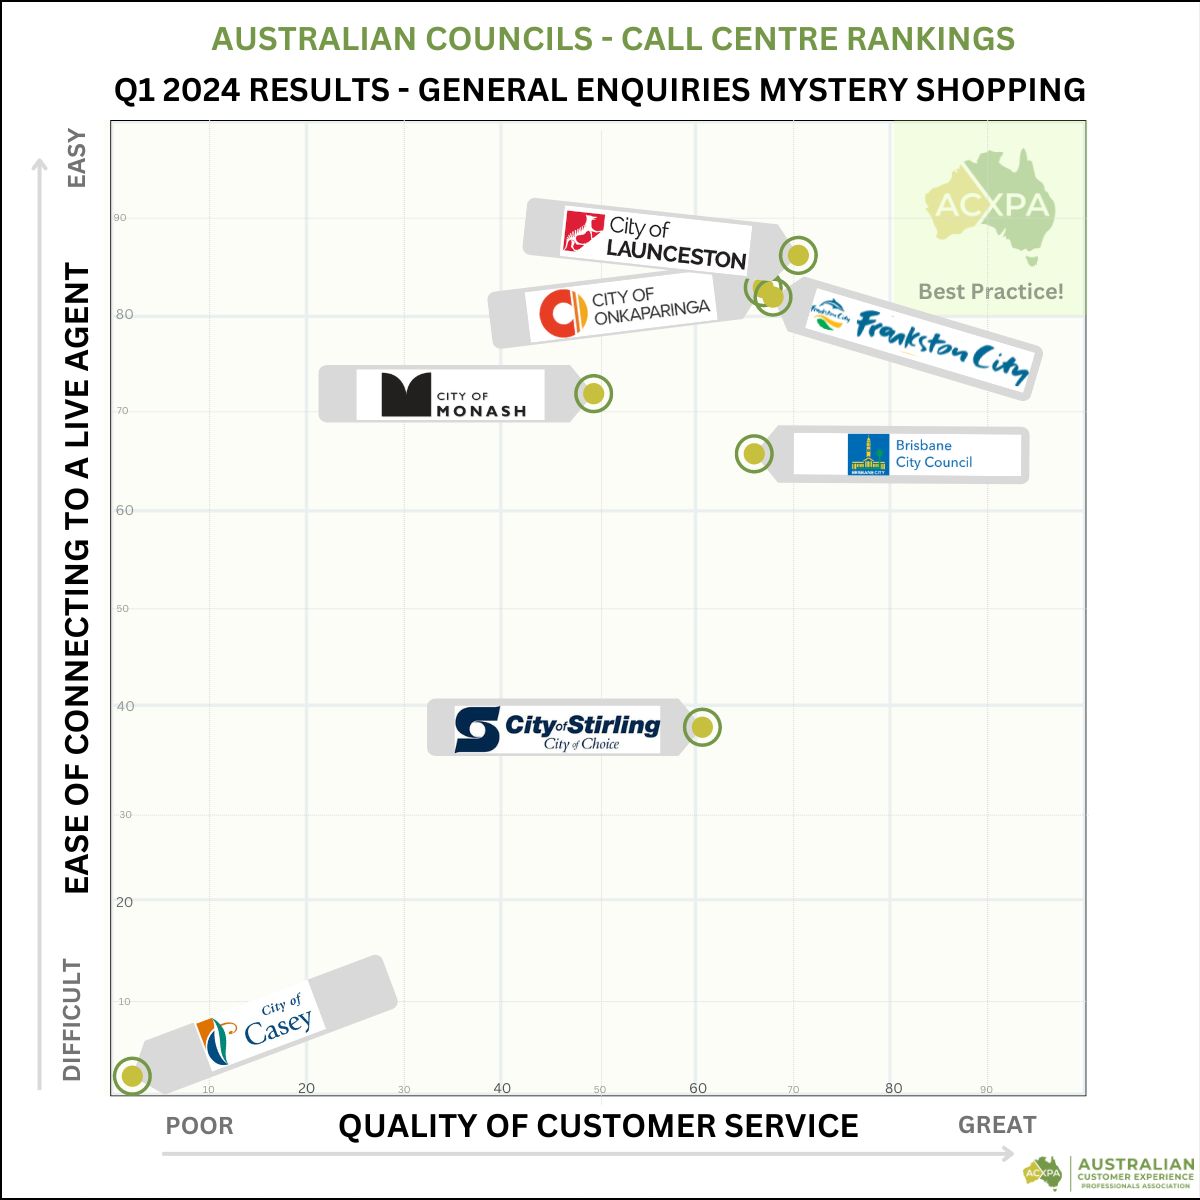 Councils Q1 2024 Call Centre Rankings Matrix for Mystery Shopping results